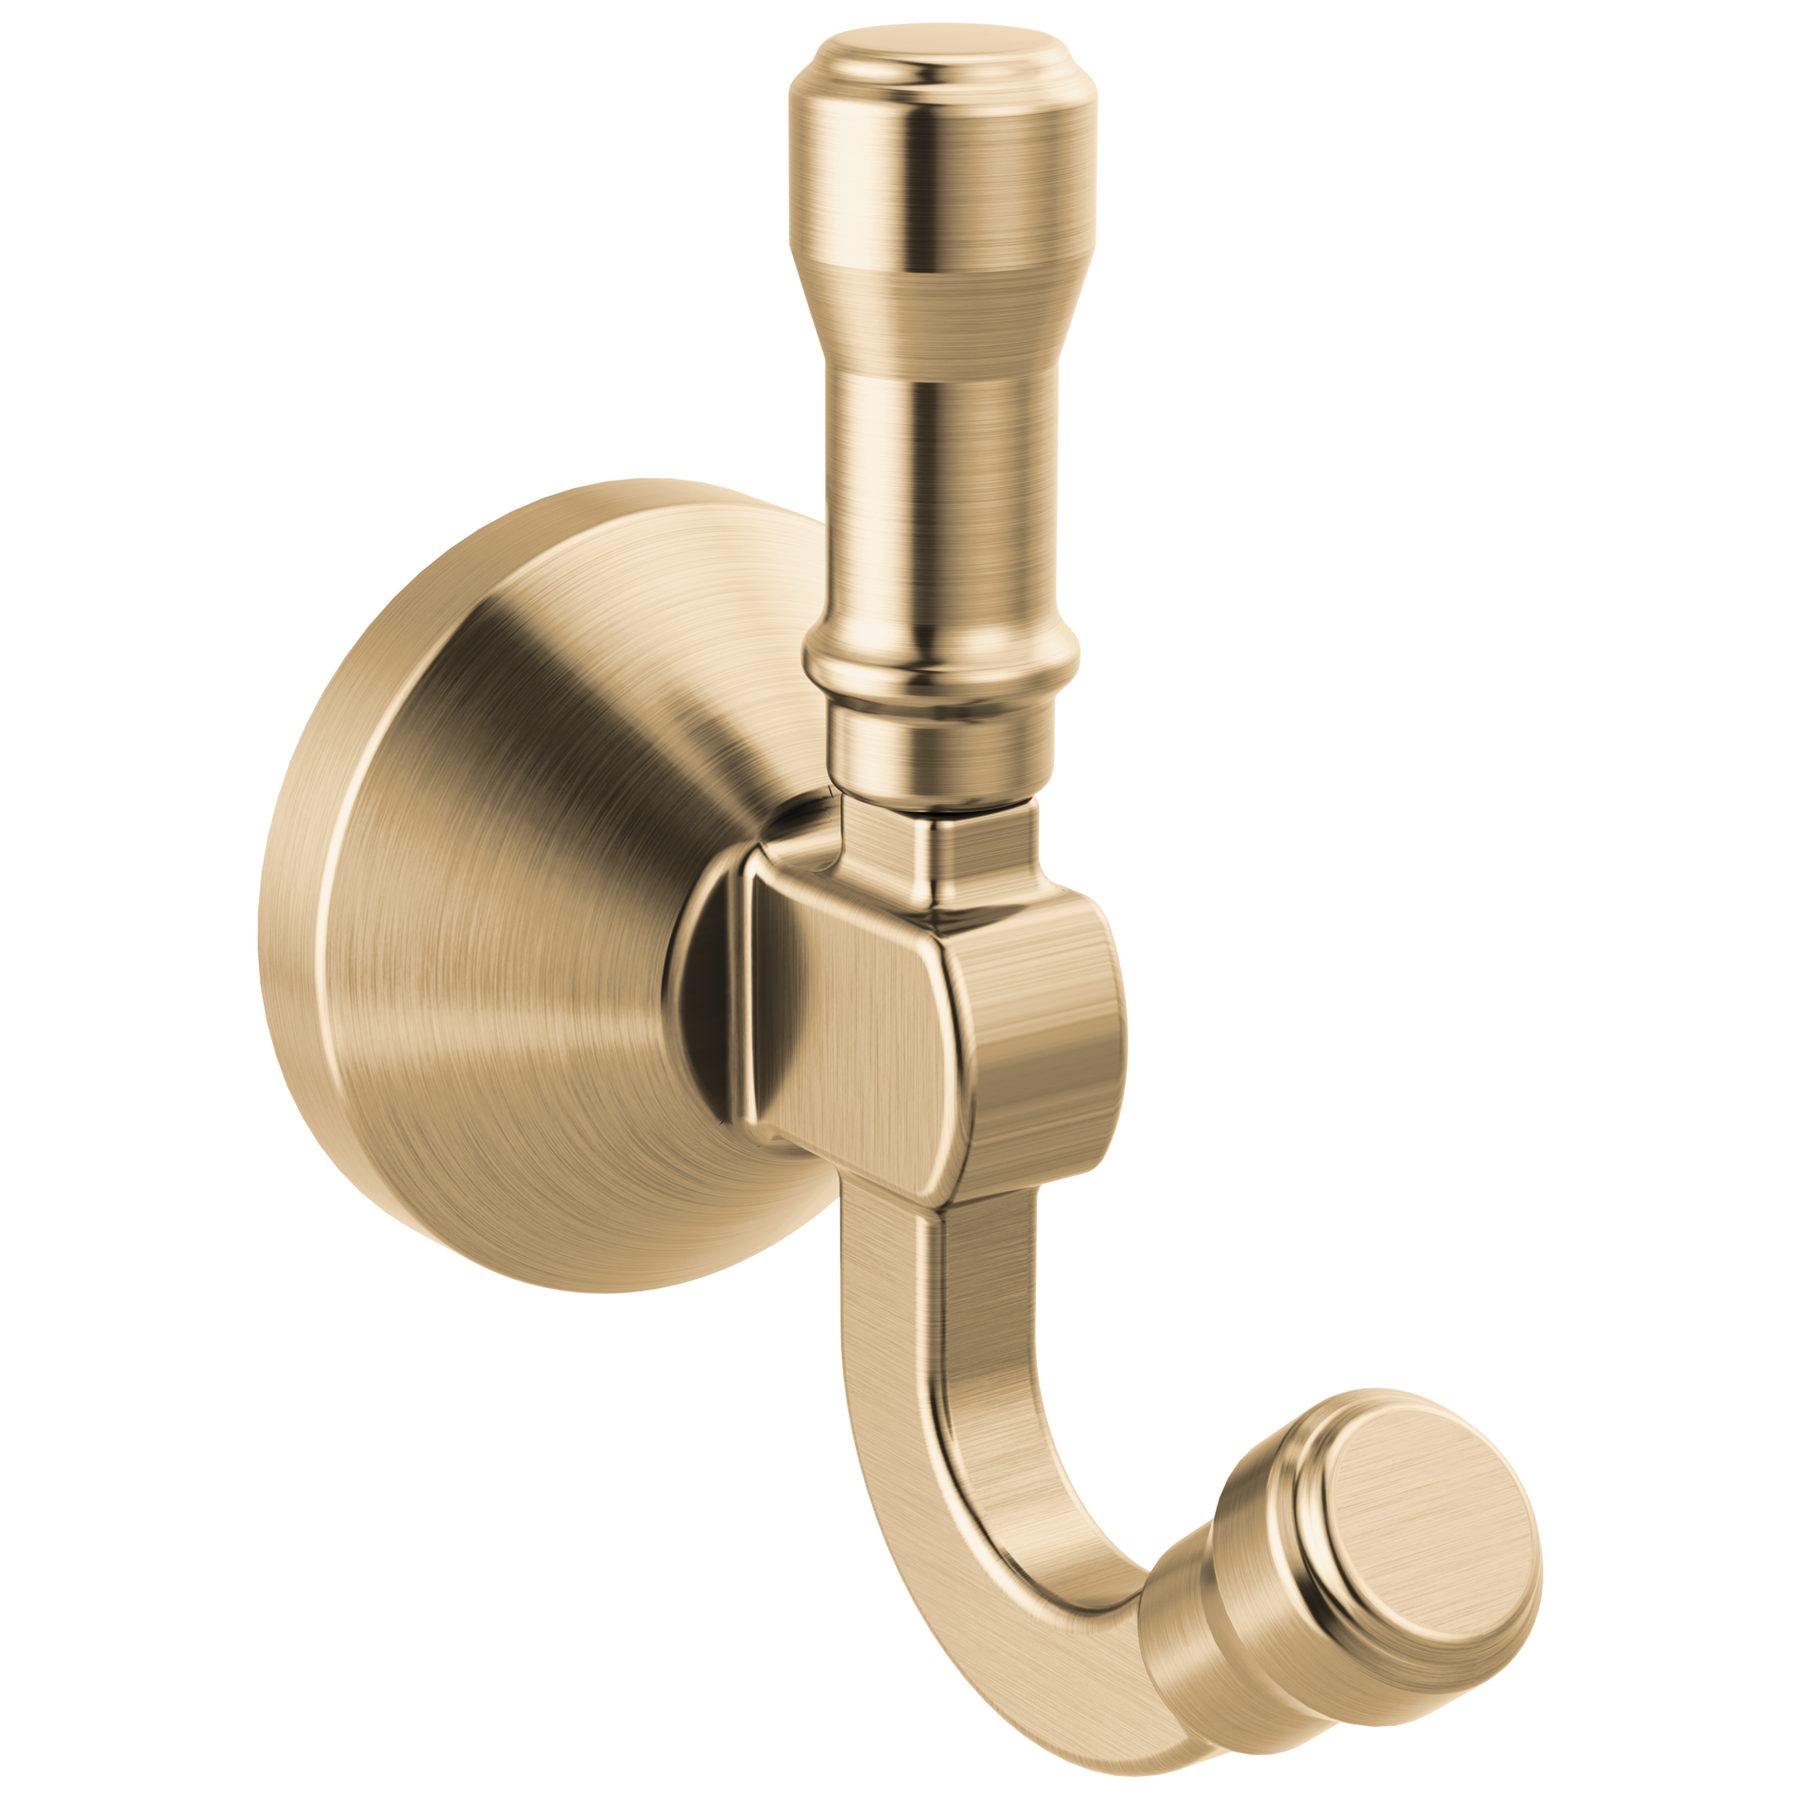 Double Robe Hook in Champagne Bronze 78435-CZ